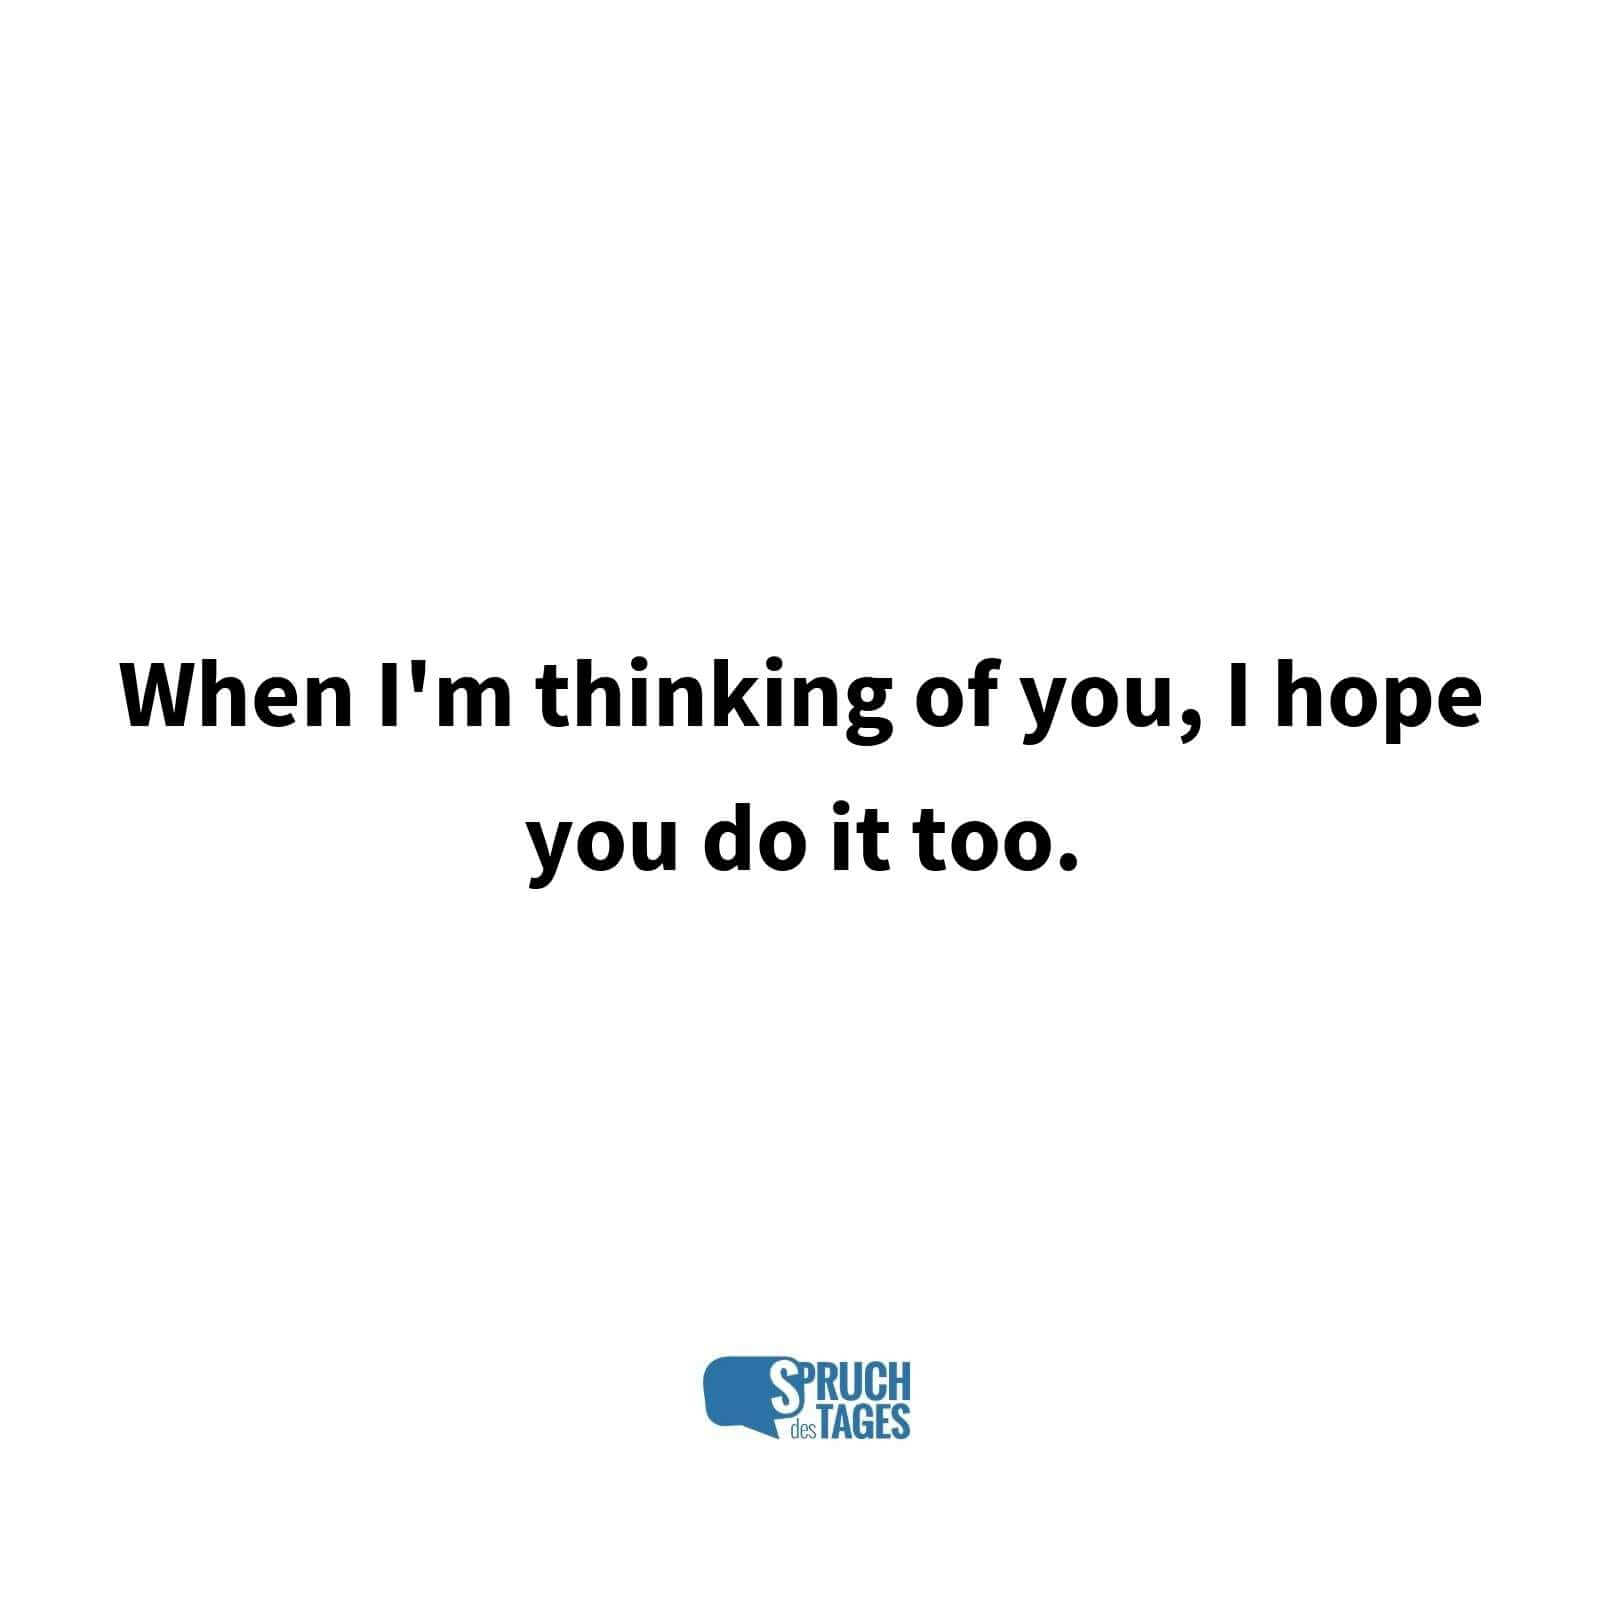 When I'm thinking of you, I hope you do it too.